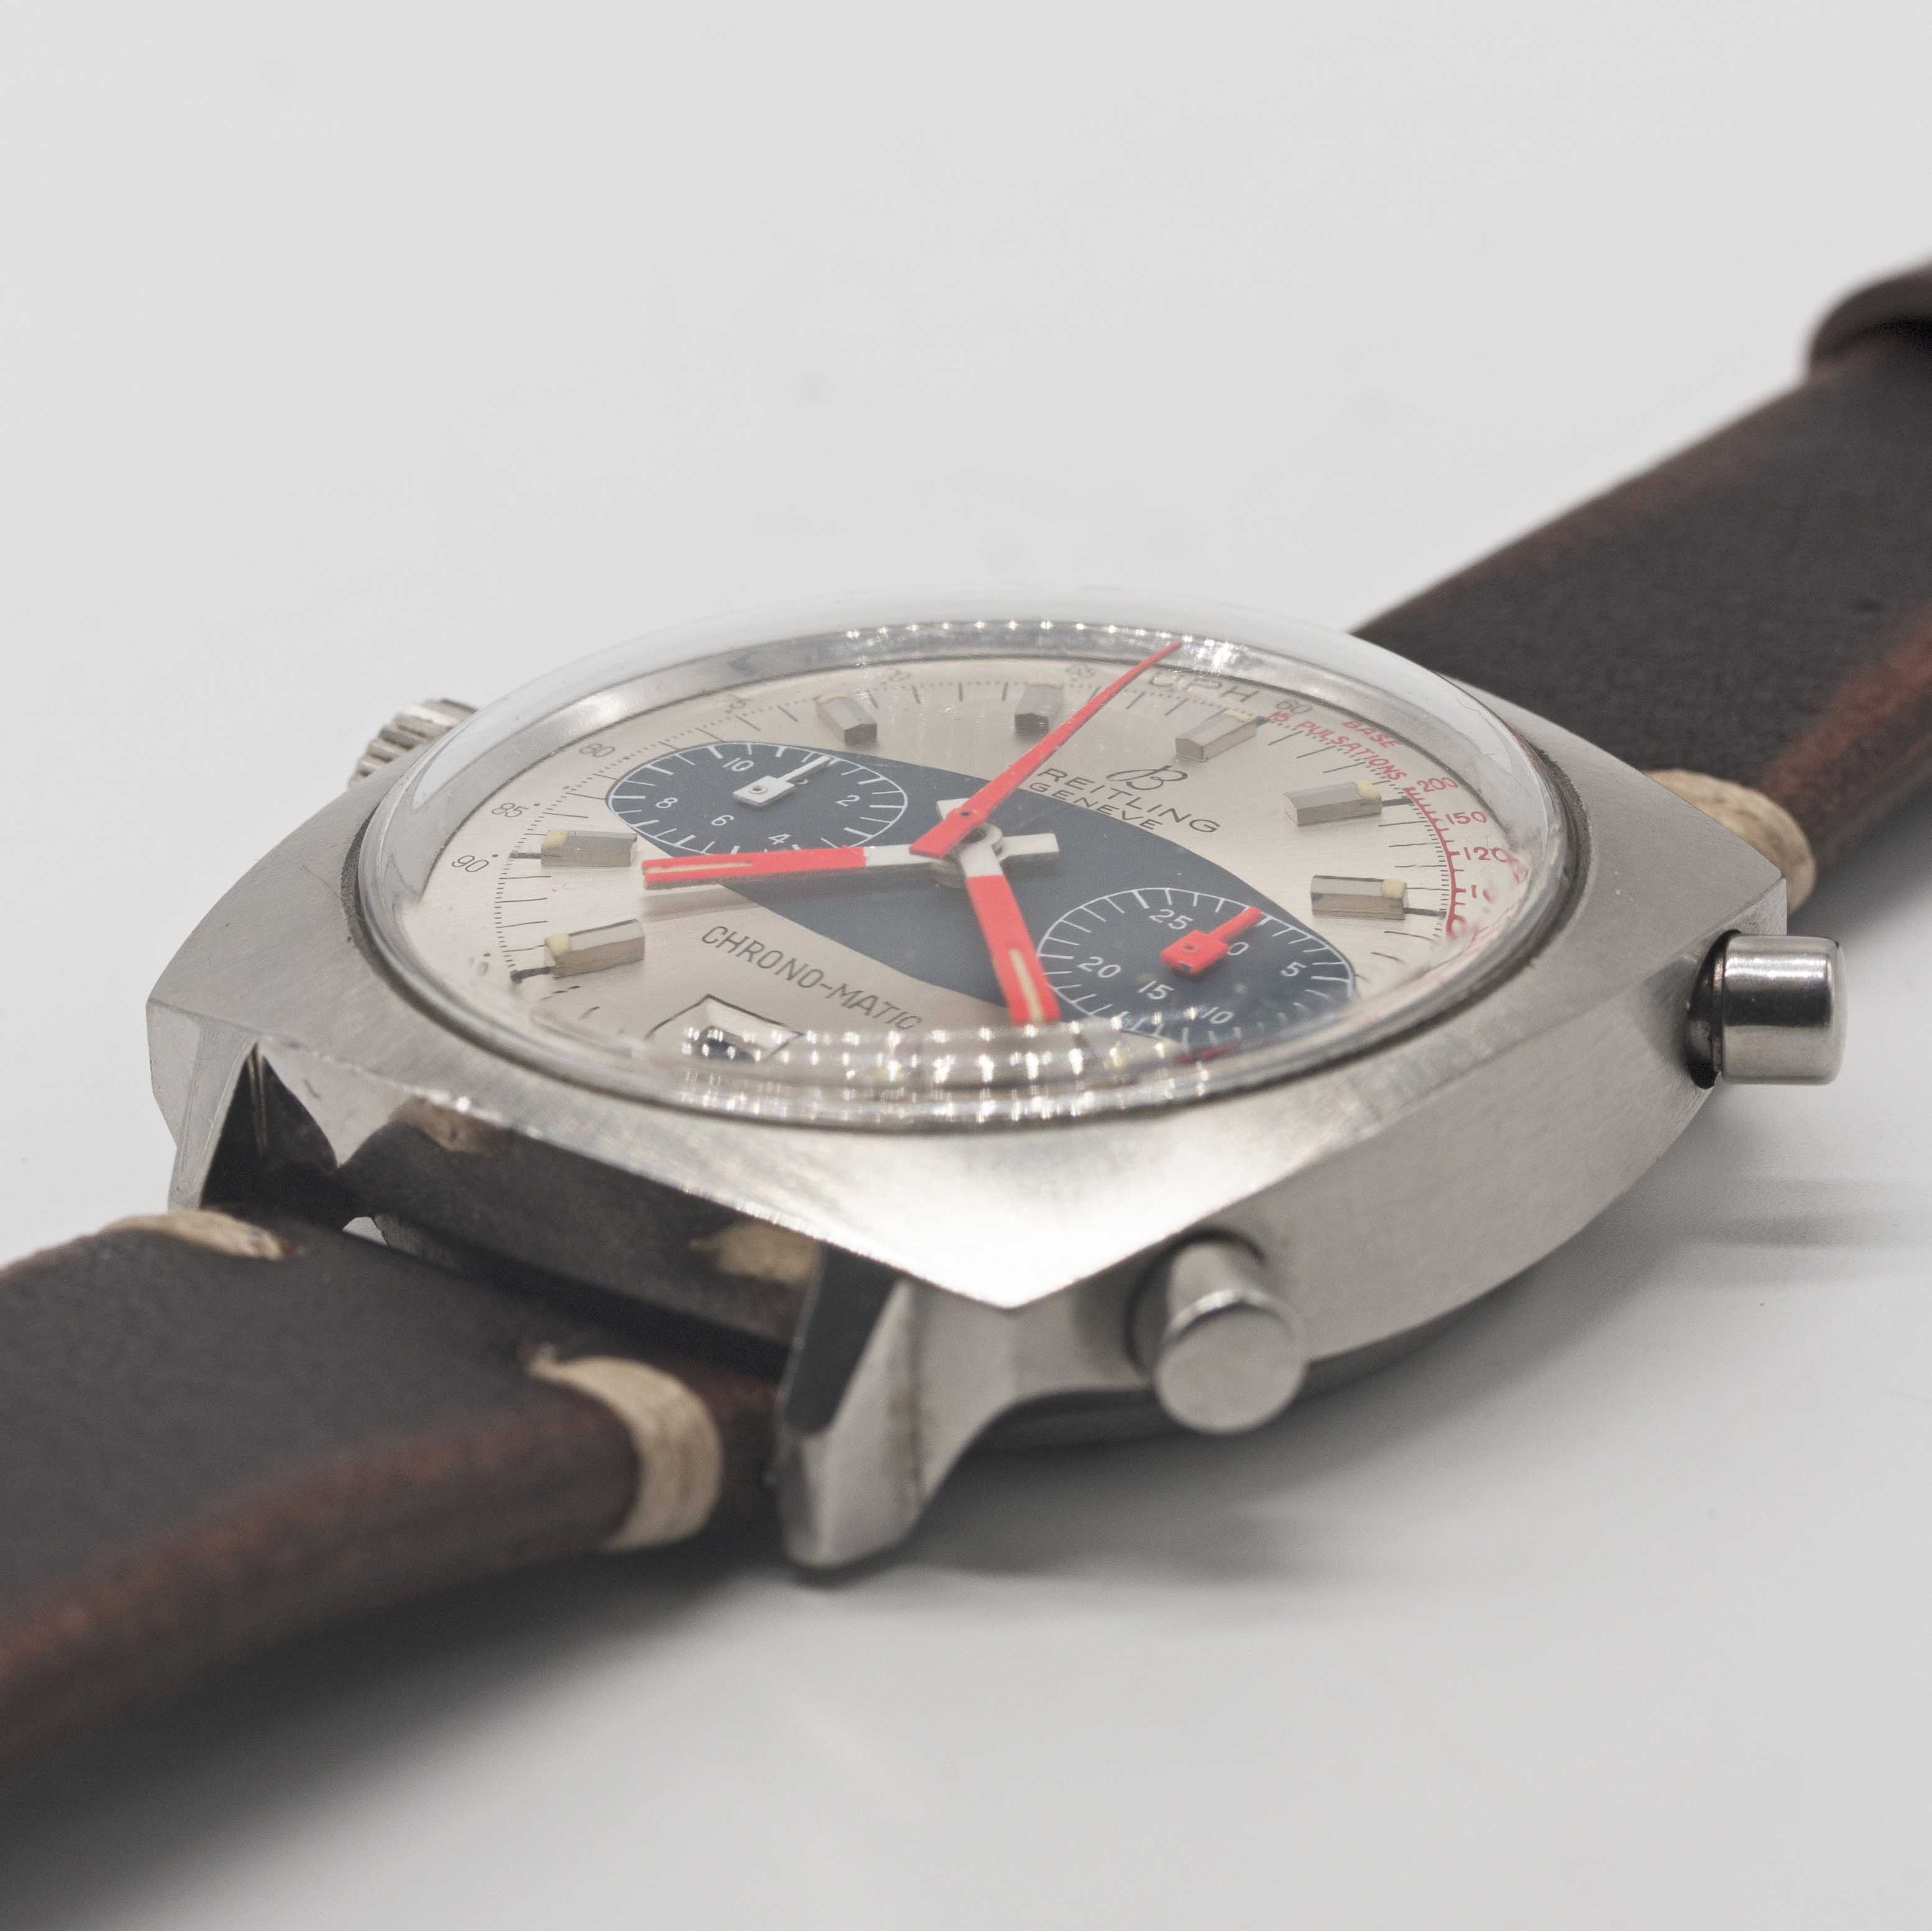 A GENTLEMAN'S STAINLESS STEEL BREITLING CHRONO-MATIC CHRONOGRAPH WRIST WATCH CIRCA 1969, REF. 2111 - Image 3 of 9